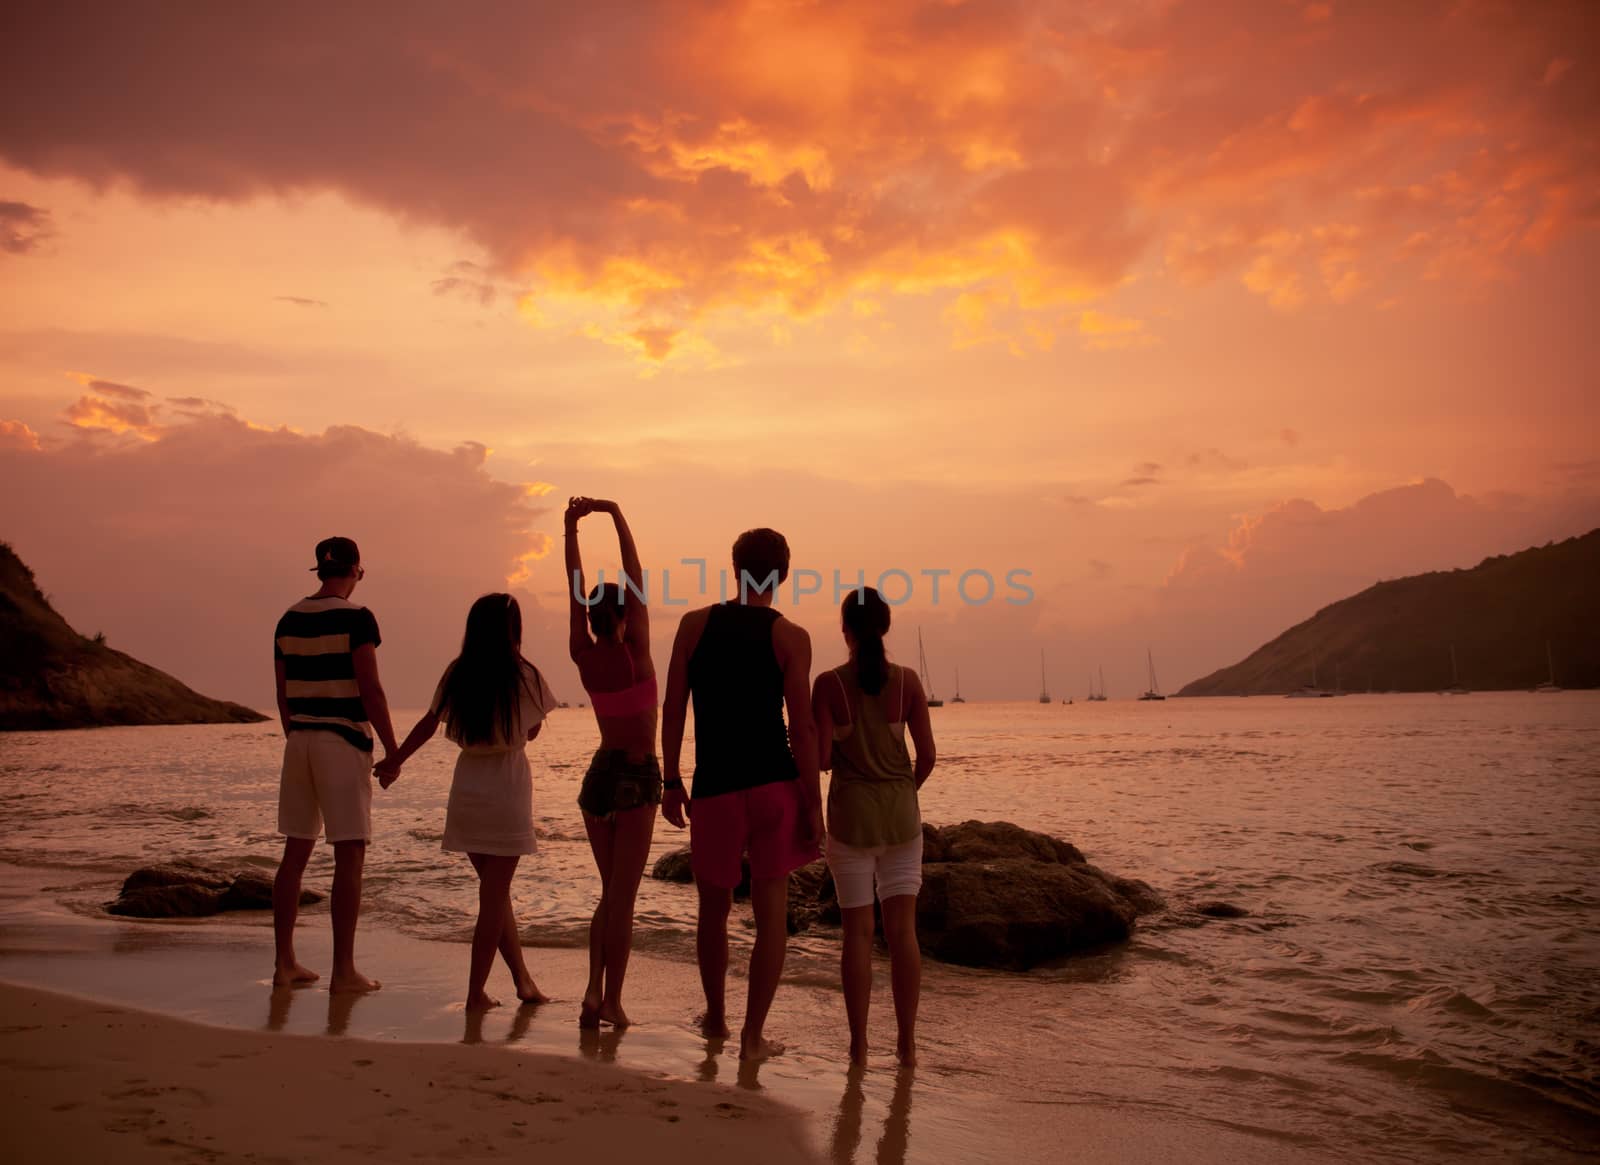 Friends on beach at sunset by ALotOfPeople